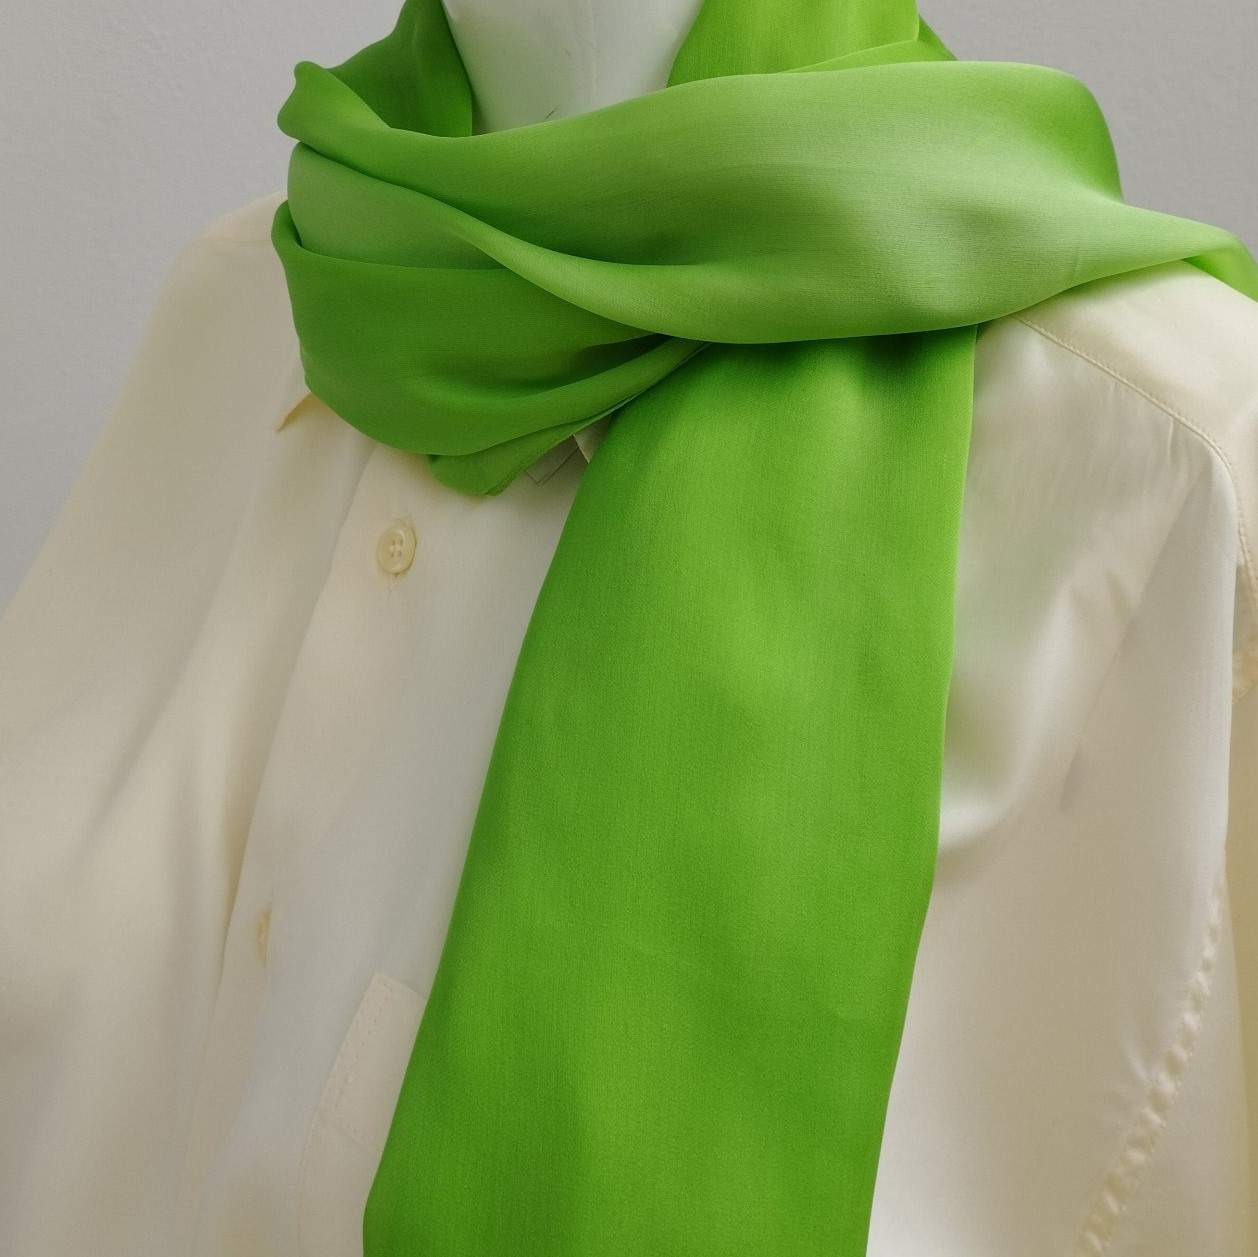 Composition: Silk100% Color: Green-Blue- White Dimensions: 0,70* 2,00 Care: Dry Clean